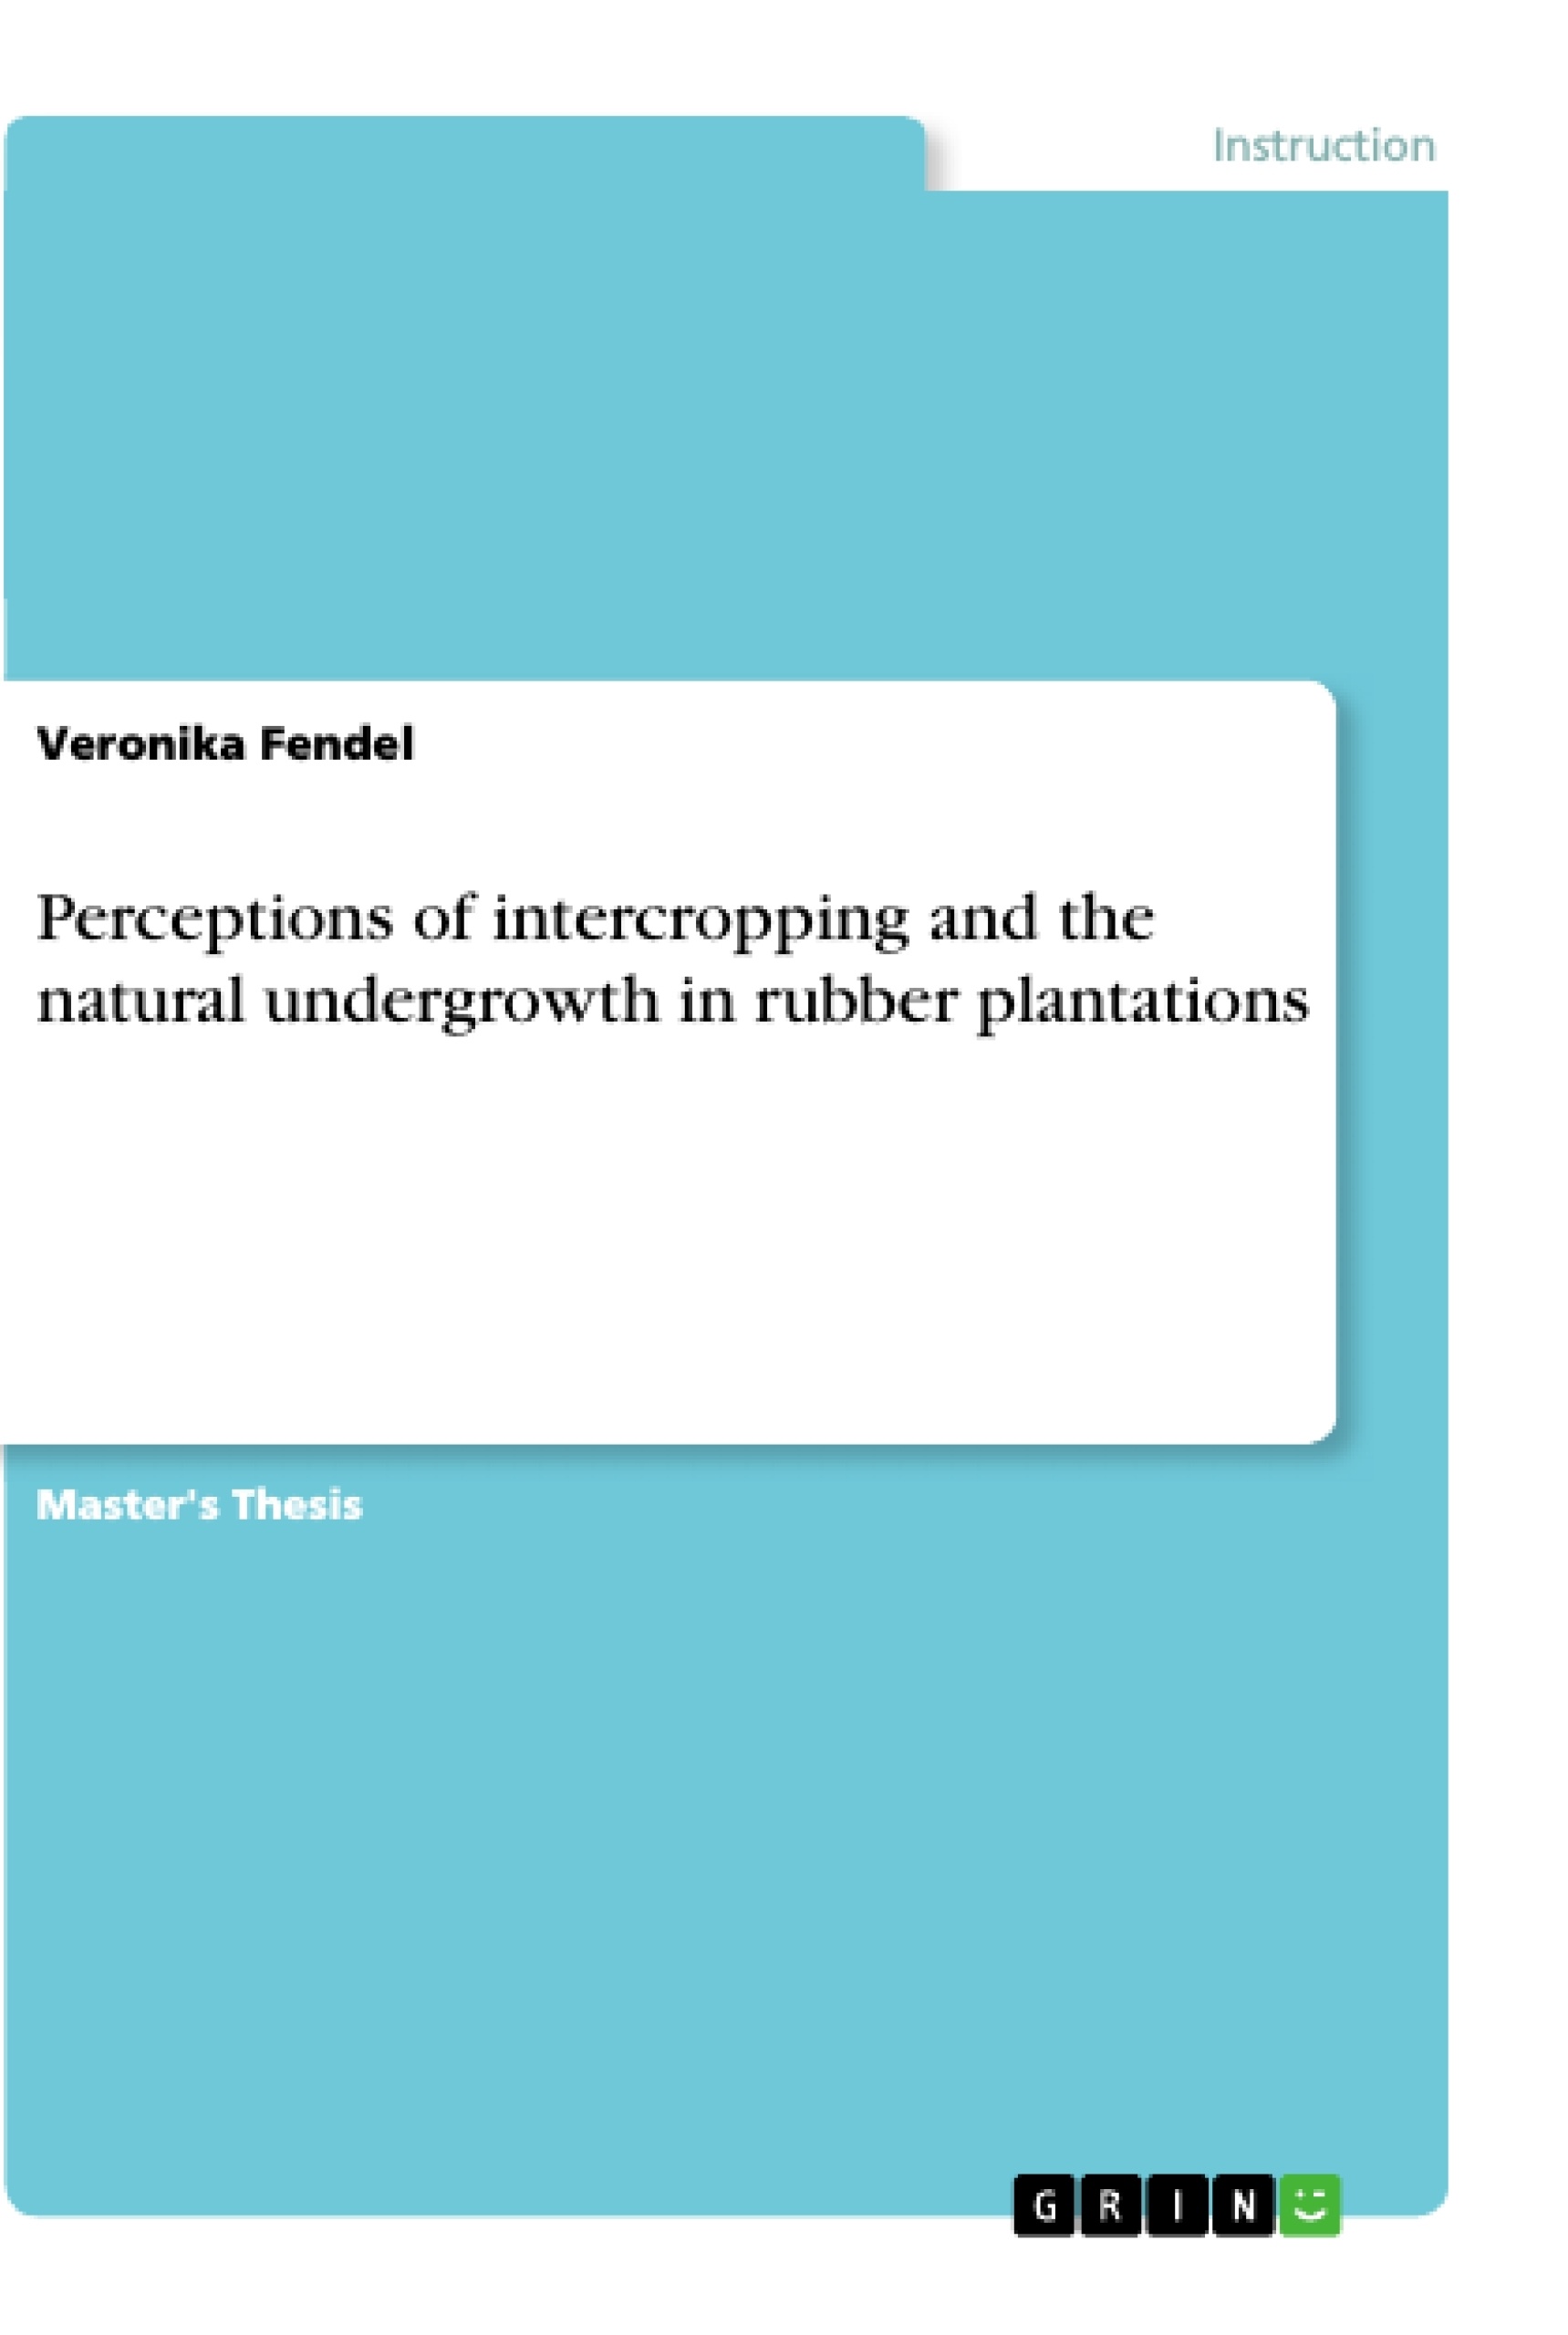 Title: Perceptions of intercropping and the natural undergrowth in rubber plantations